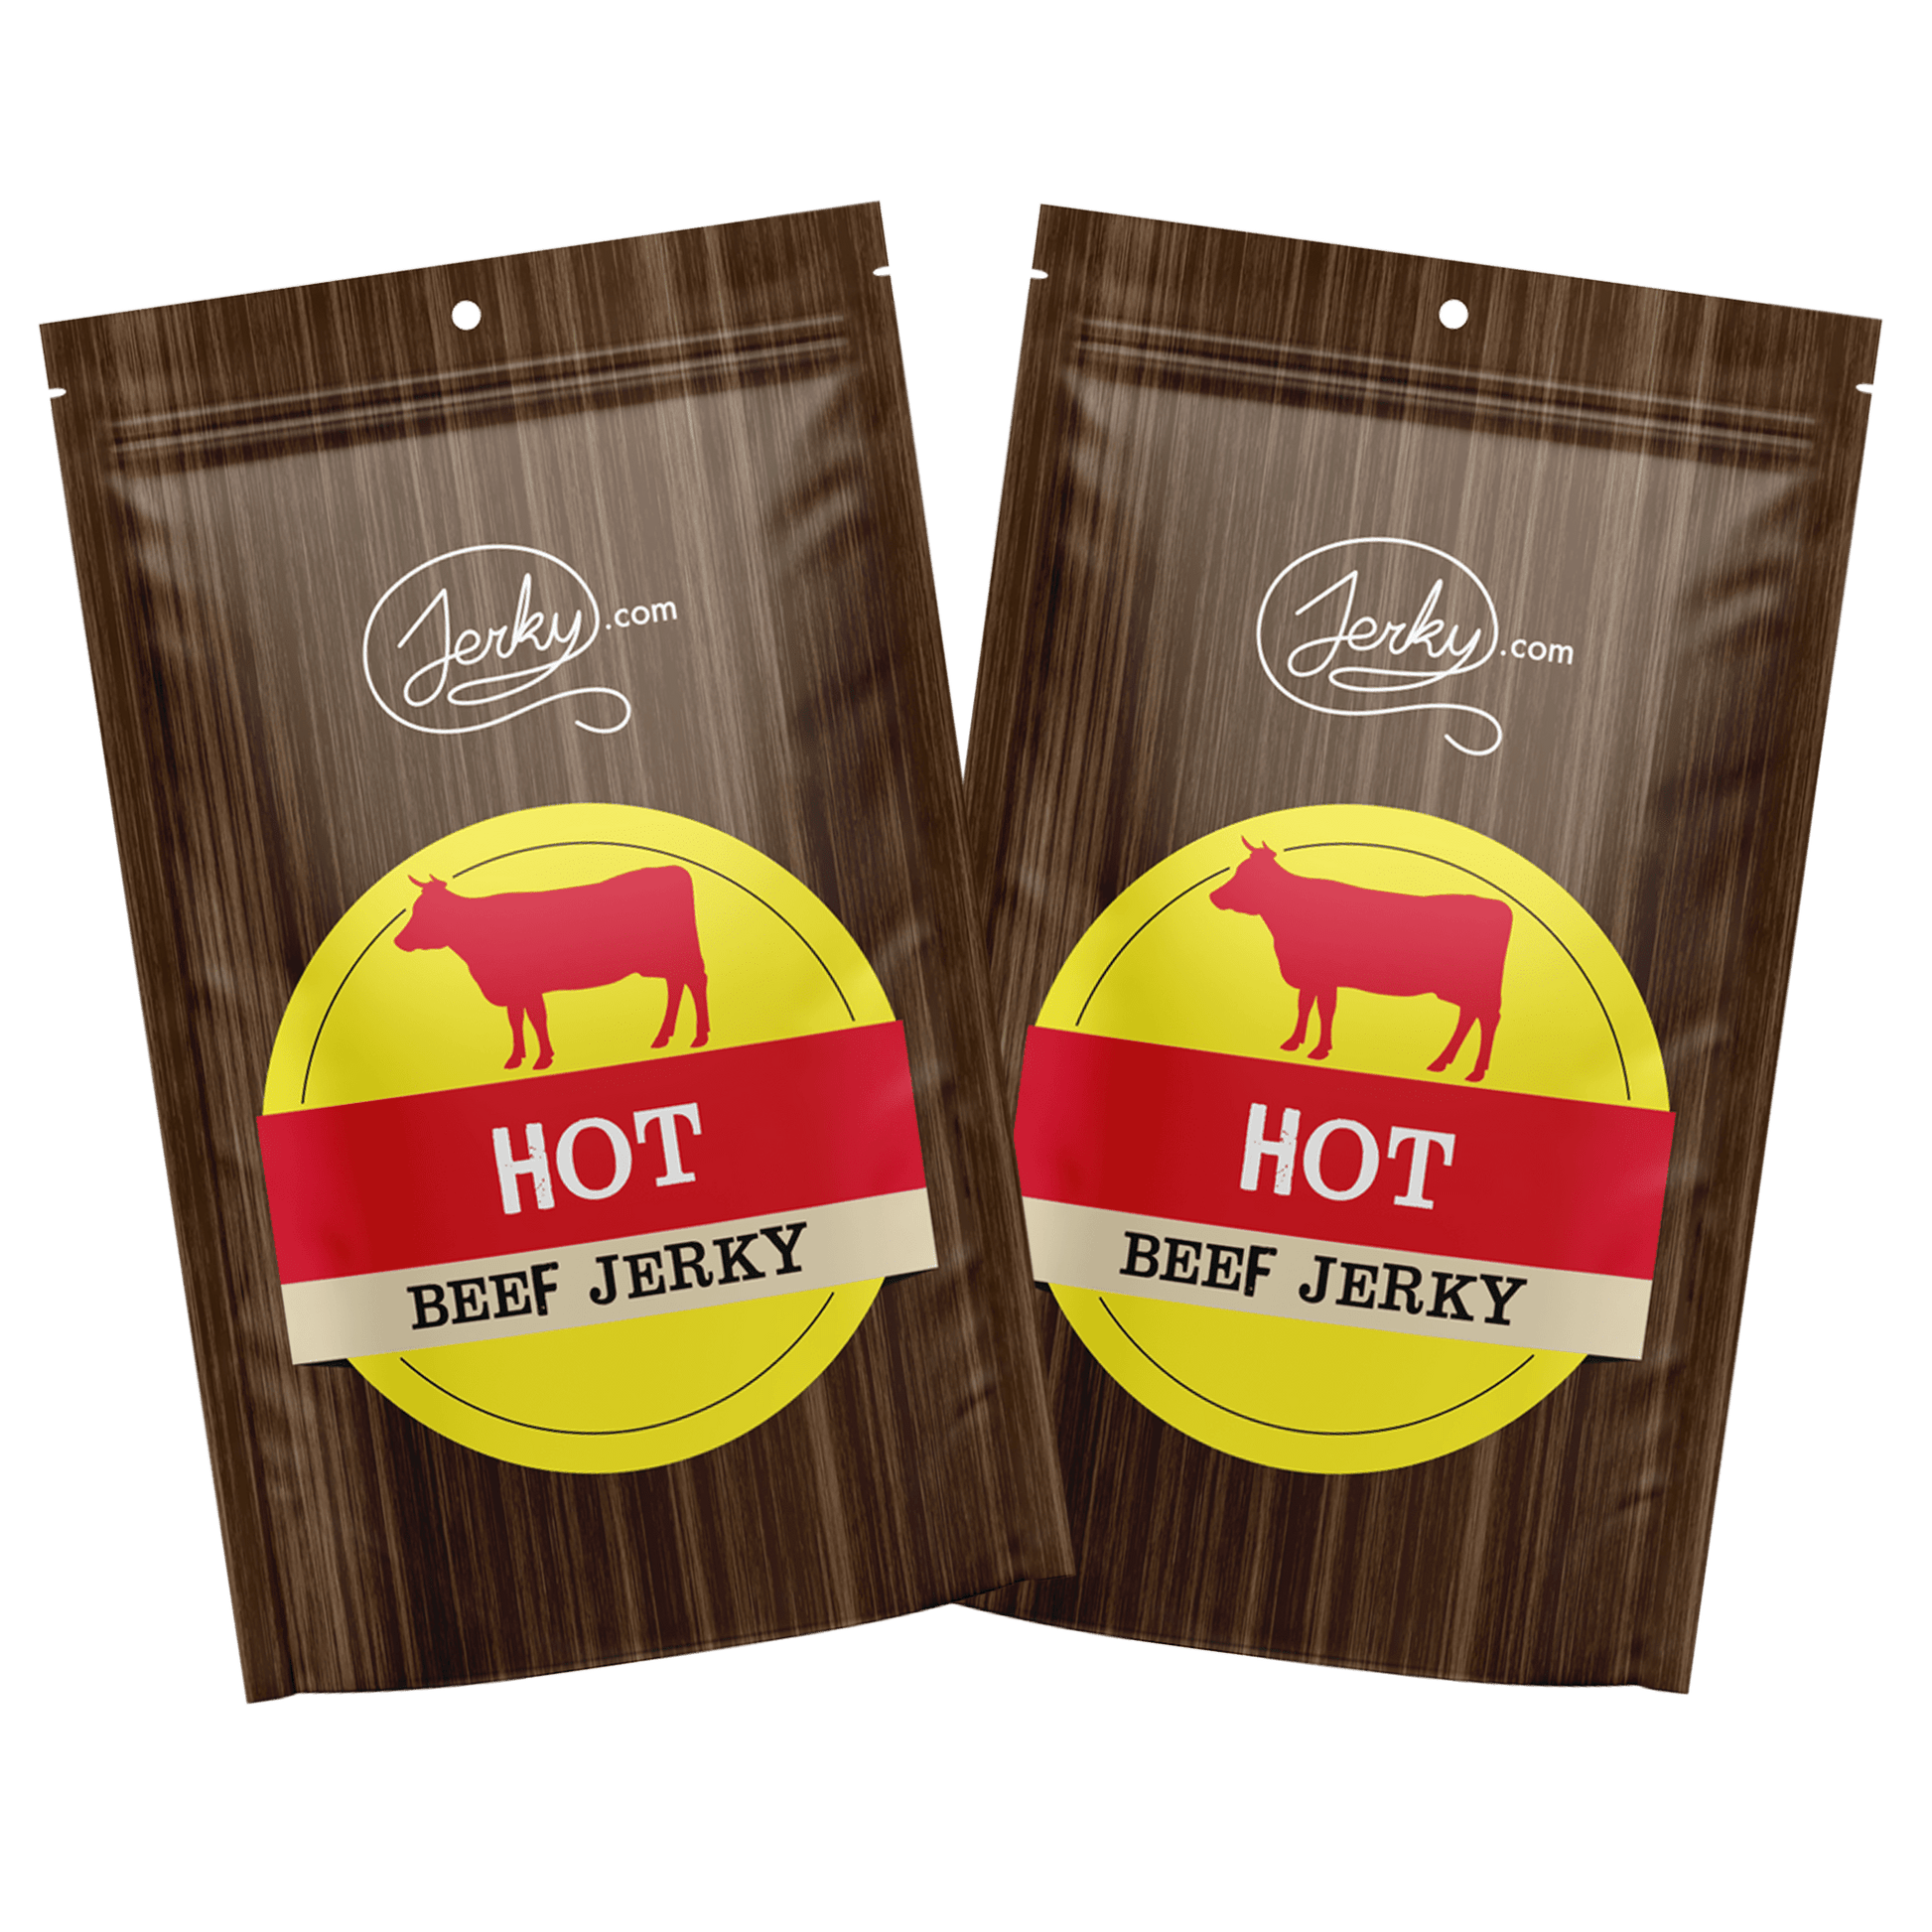 All-Natural Beef Jerky - Hot - 1 Pound Bag by Jerky.com